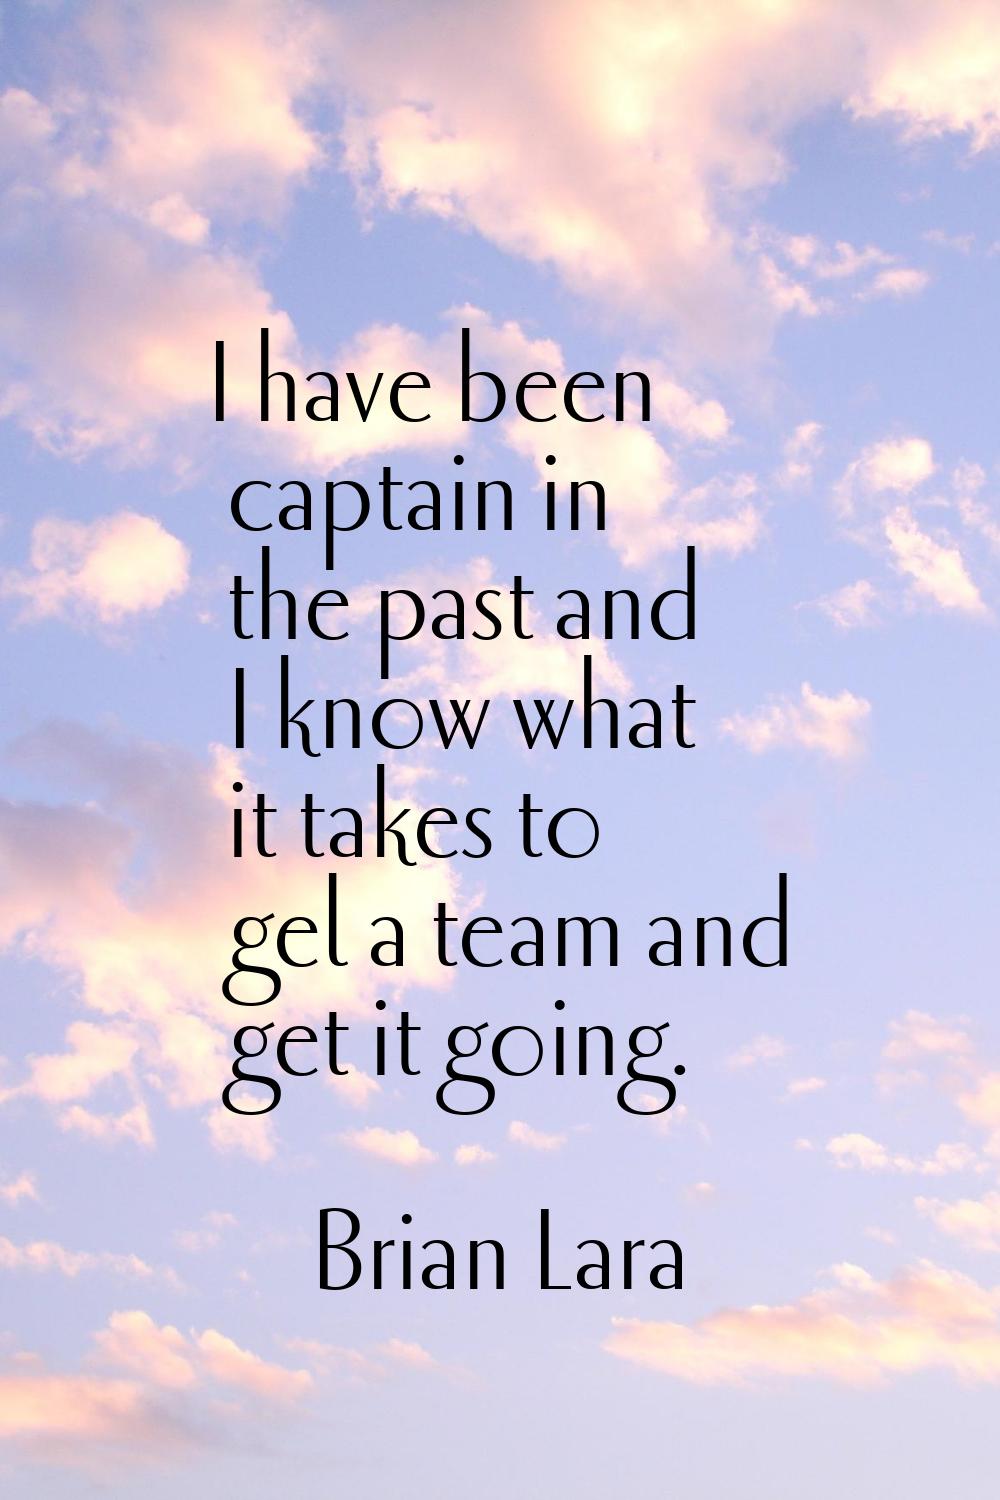 I have been captain in the past and I know what it takes to gel a team and get it going.